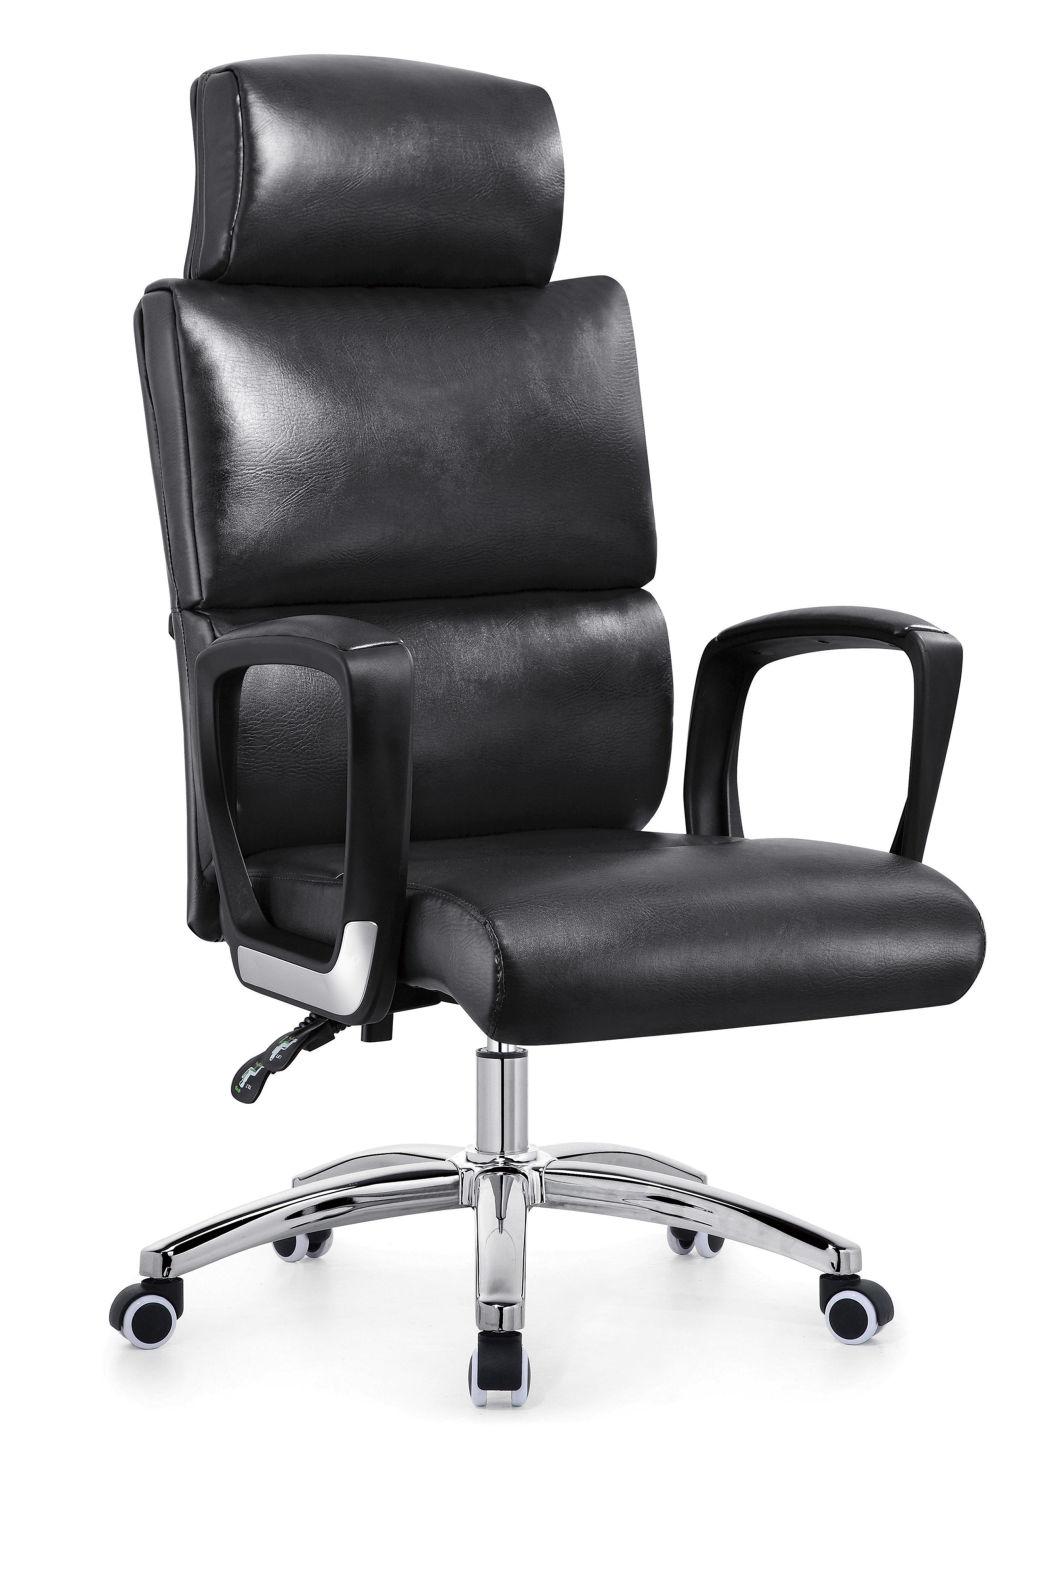 Swivel Brown PU Leather Office Chair-1819